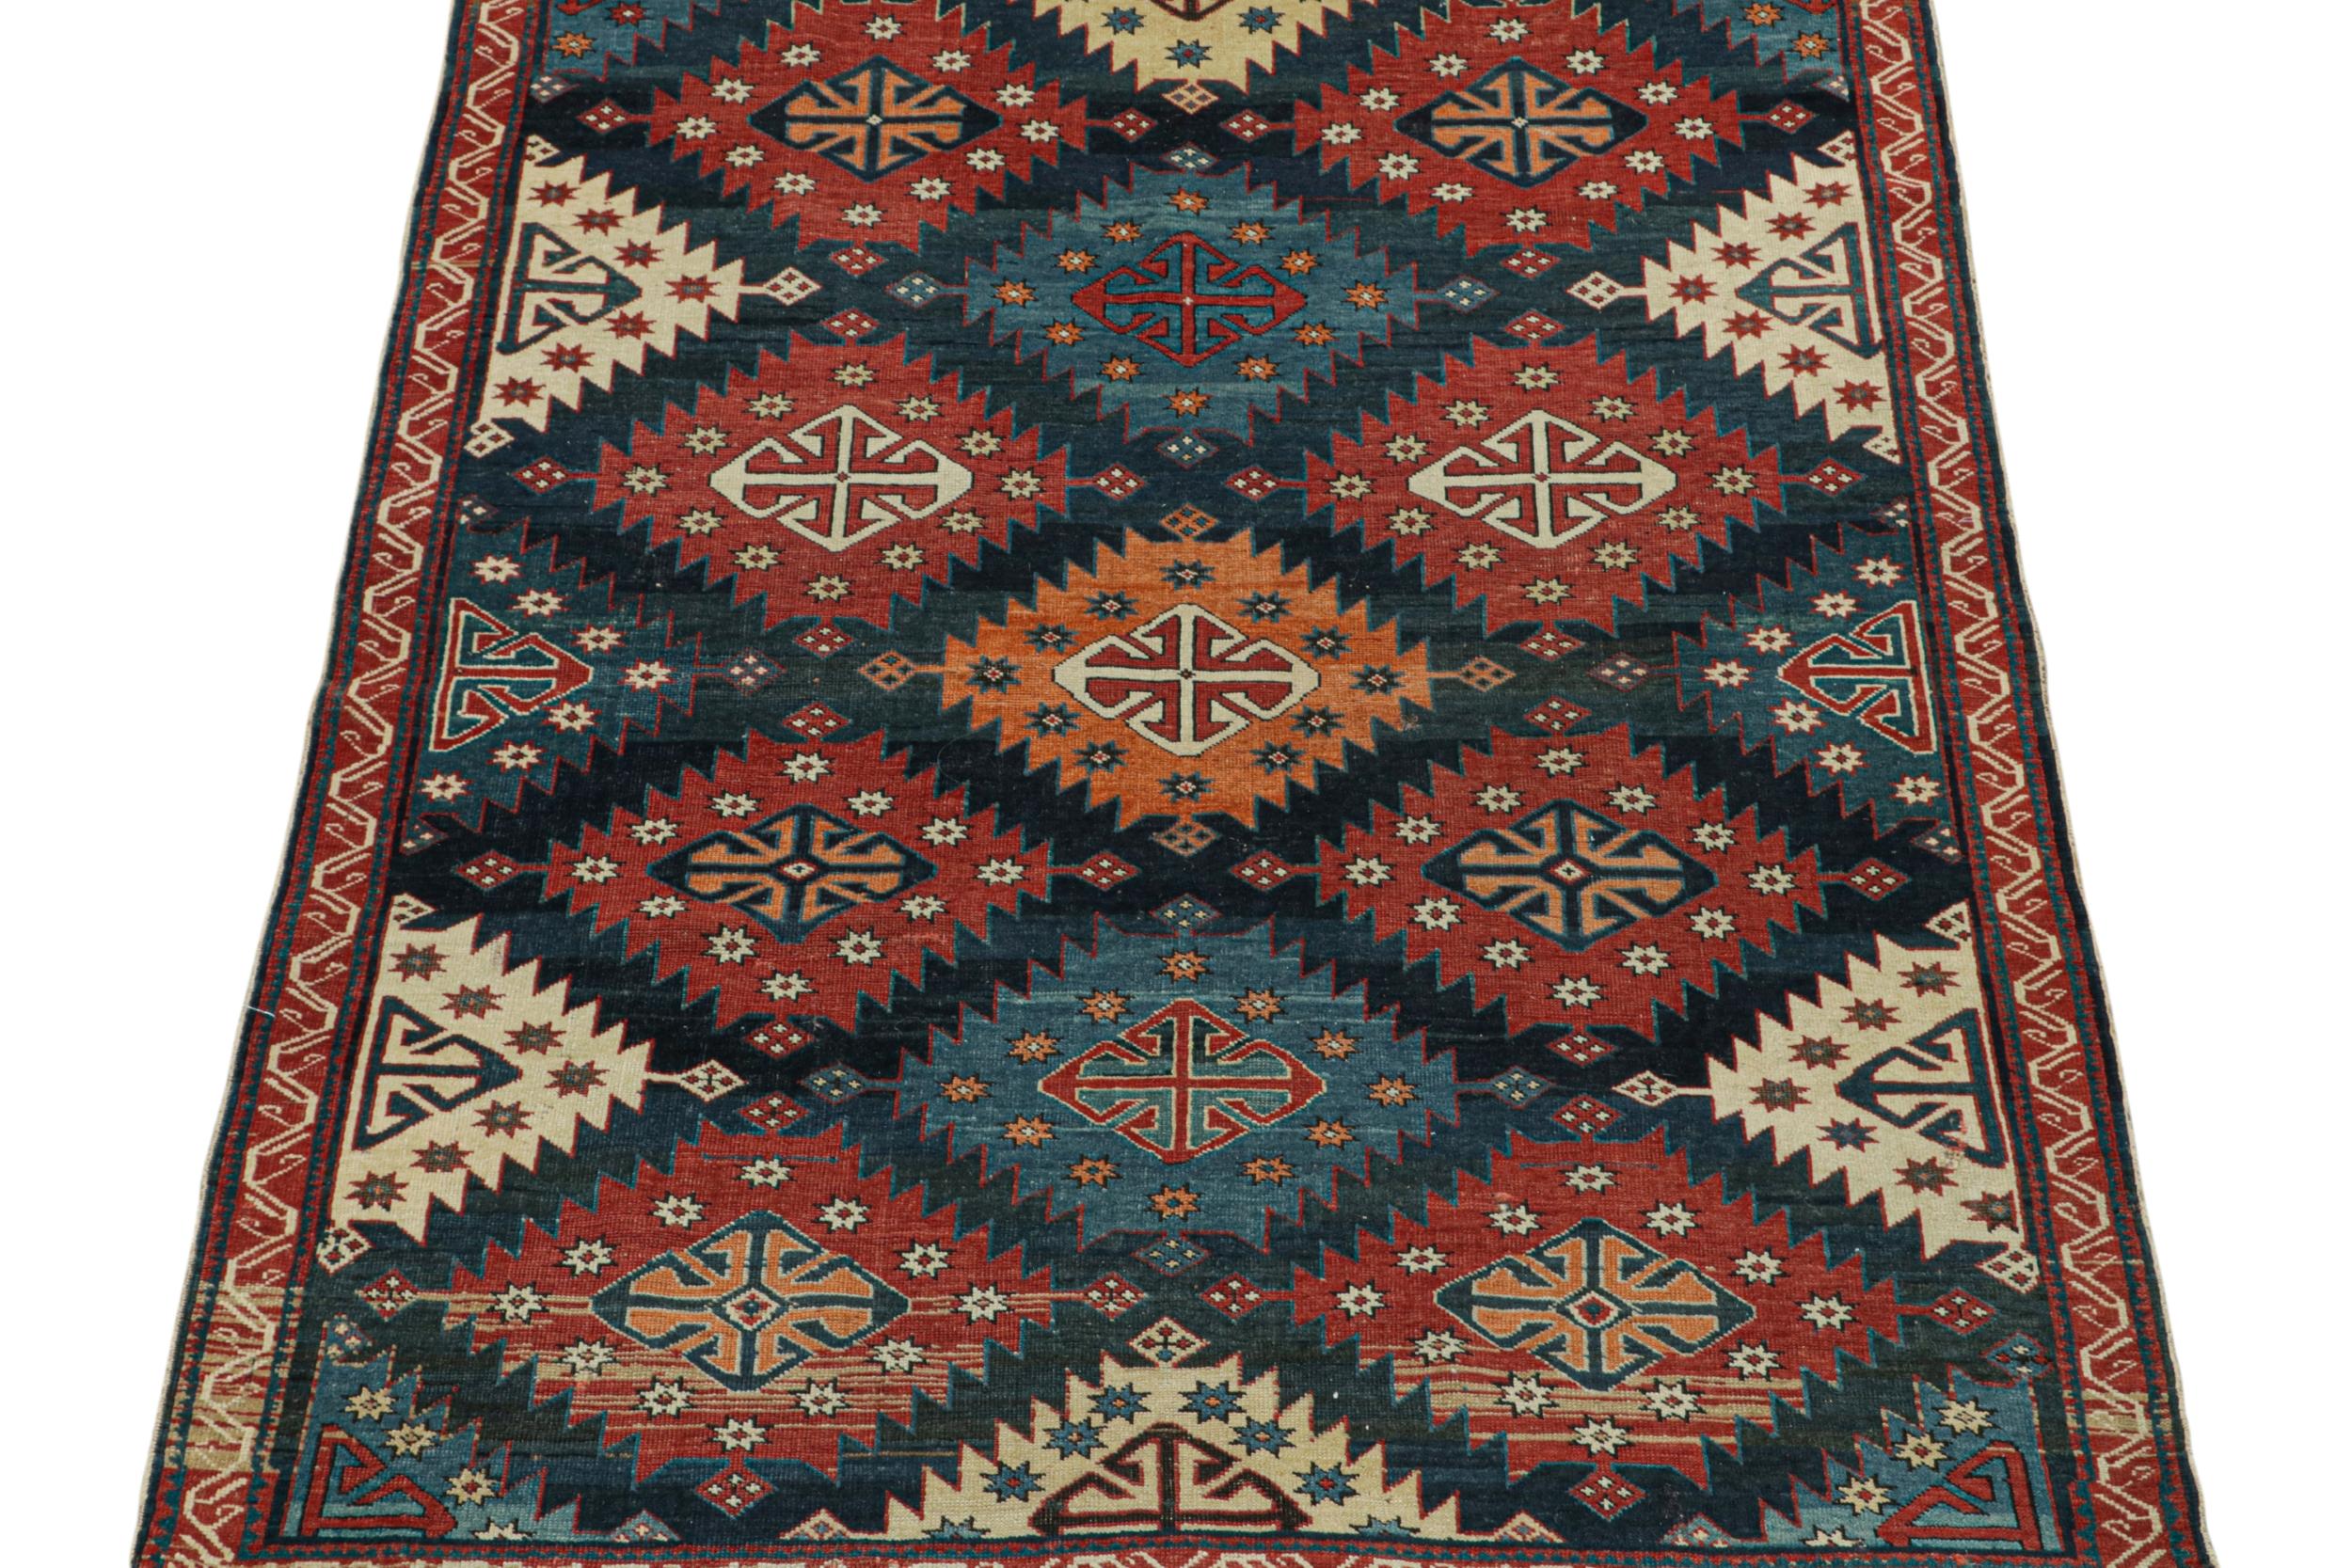 Antique Caucasian Kazak Rug in Red & Blue Tribal Patterns from Rug & Kilim In Good Condition For Sale In Long Island City, NY